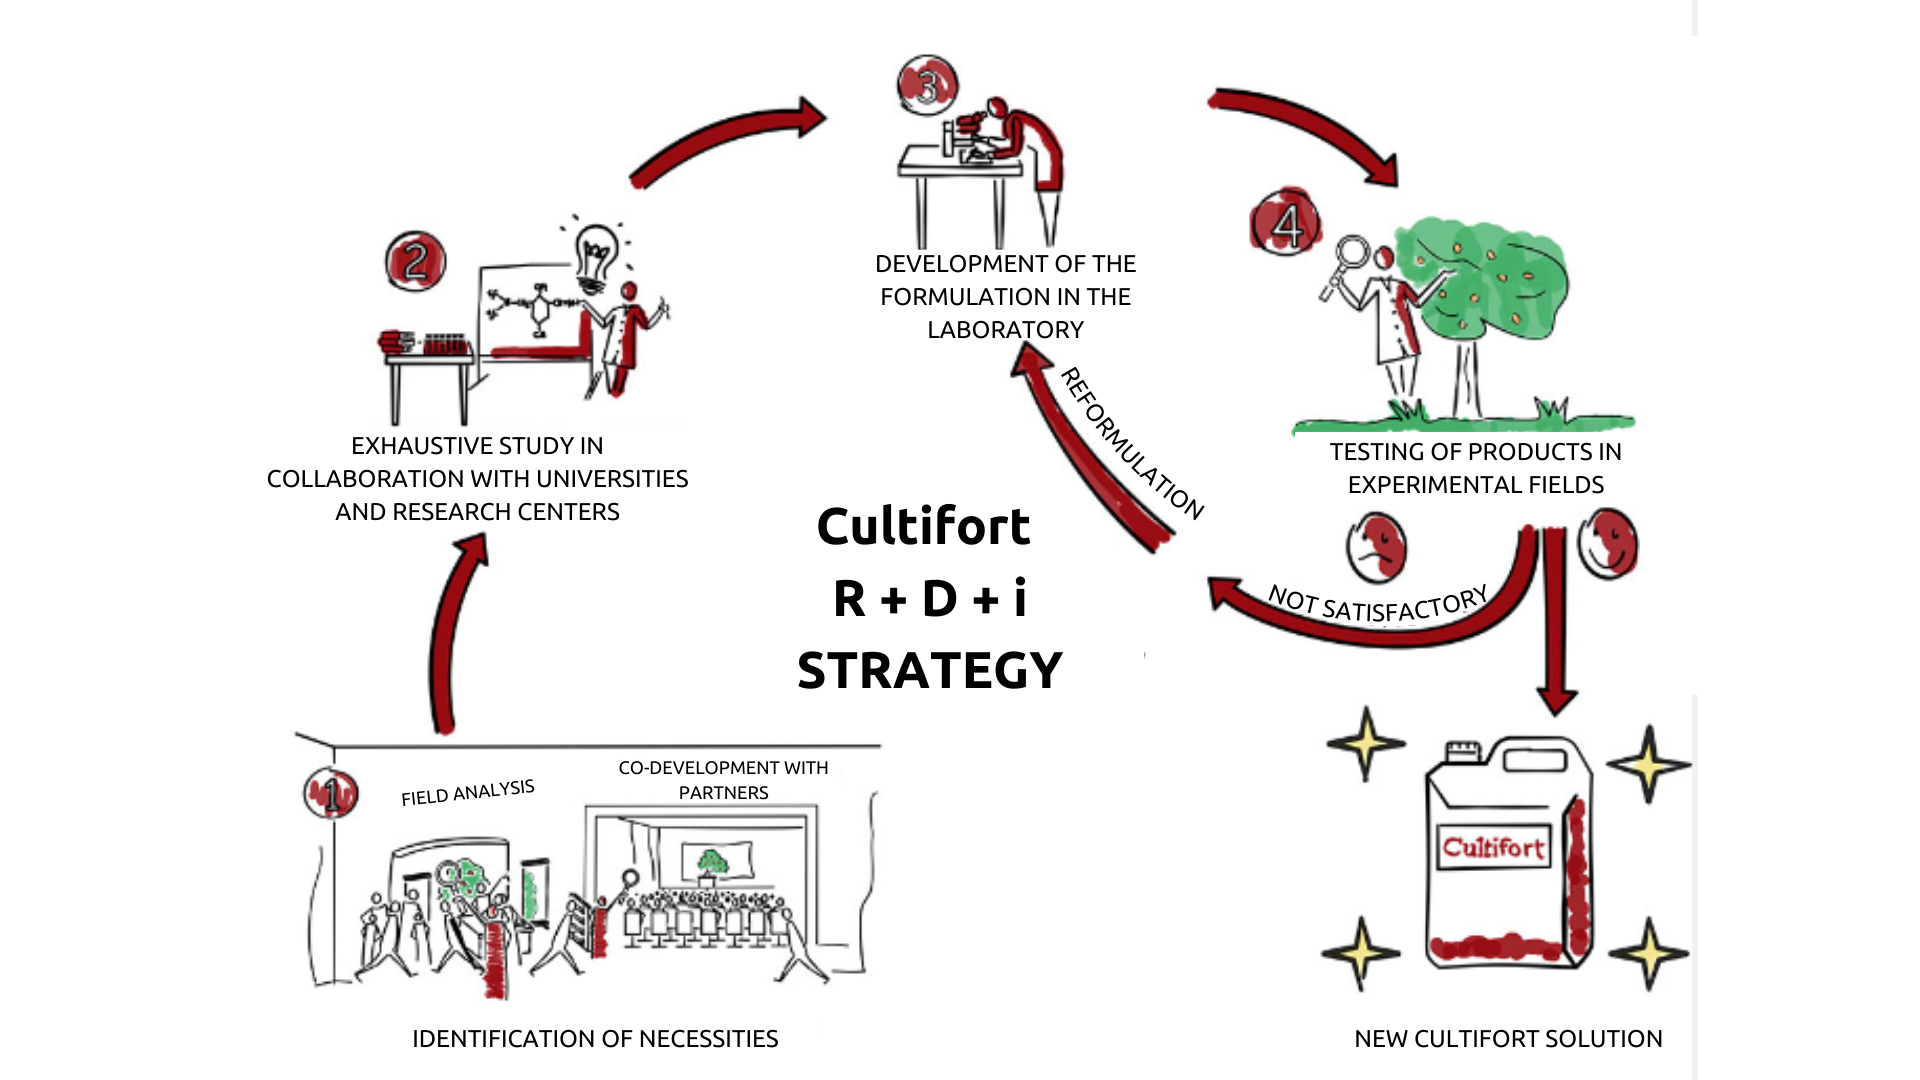 Cultifort R+D+I STRATEGY